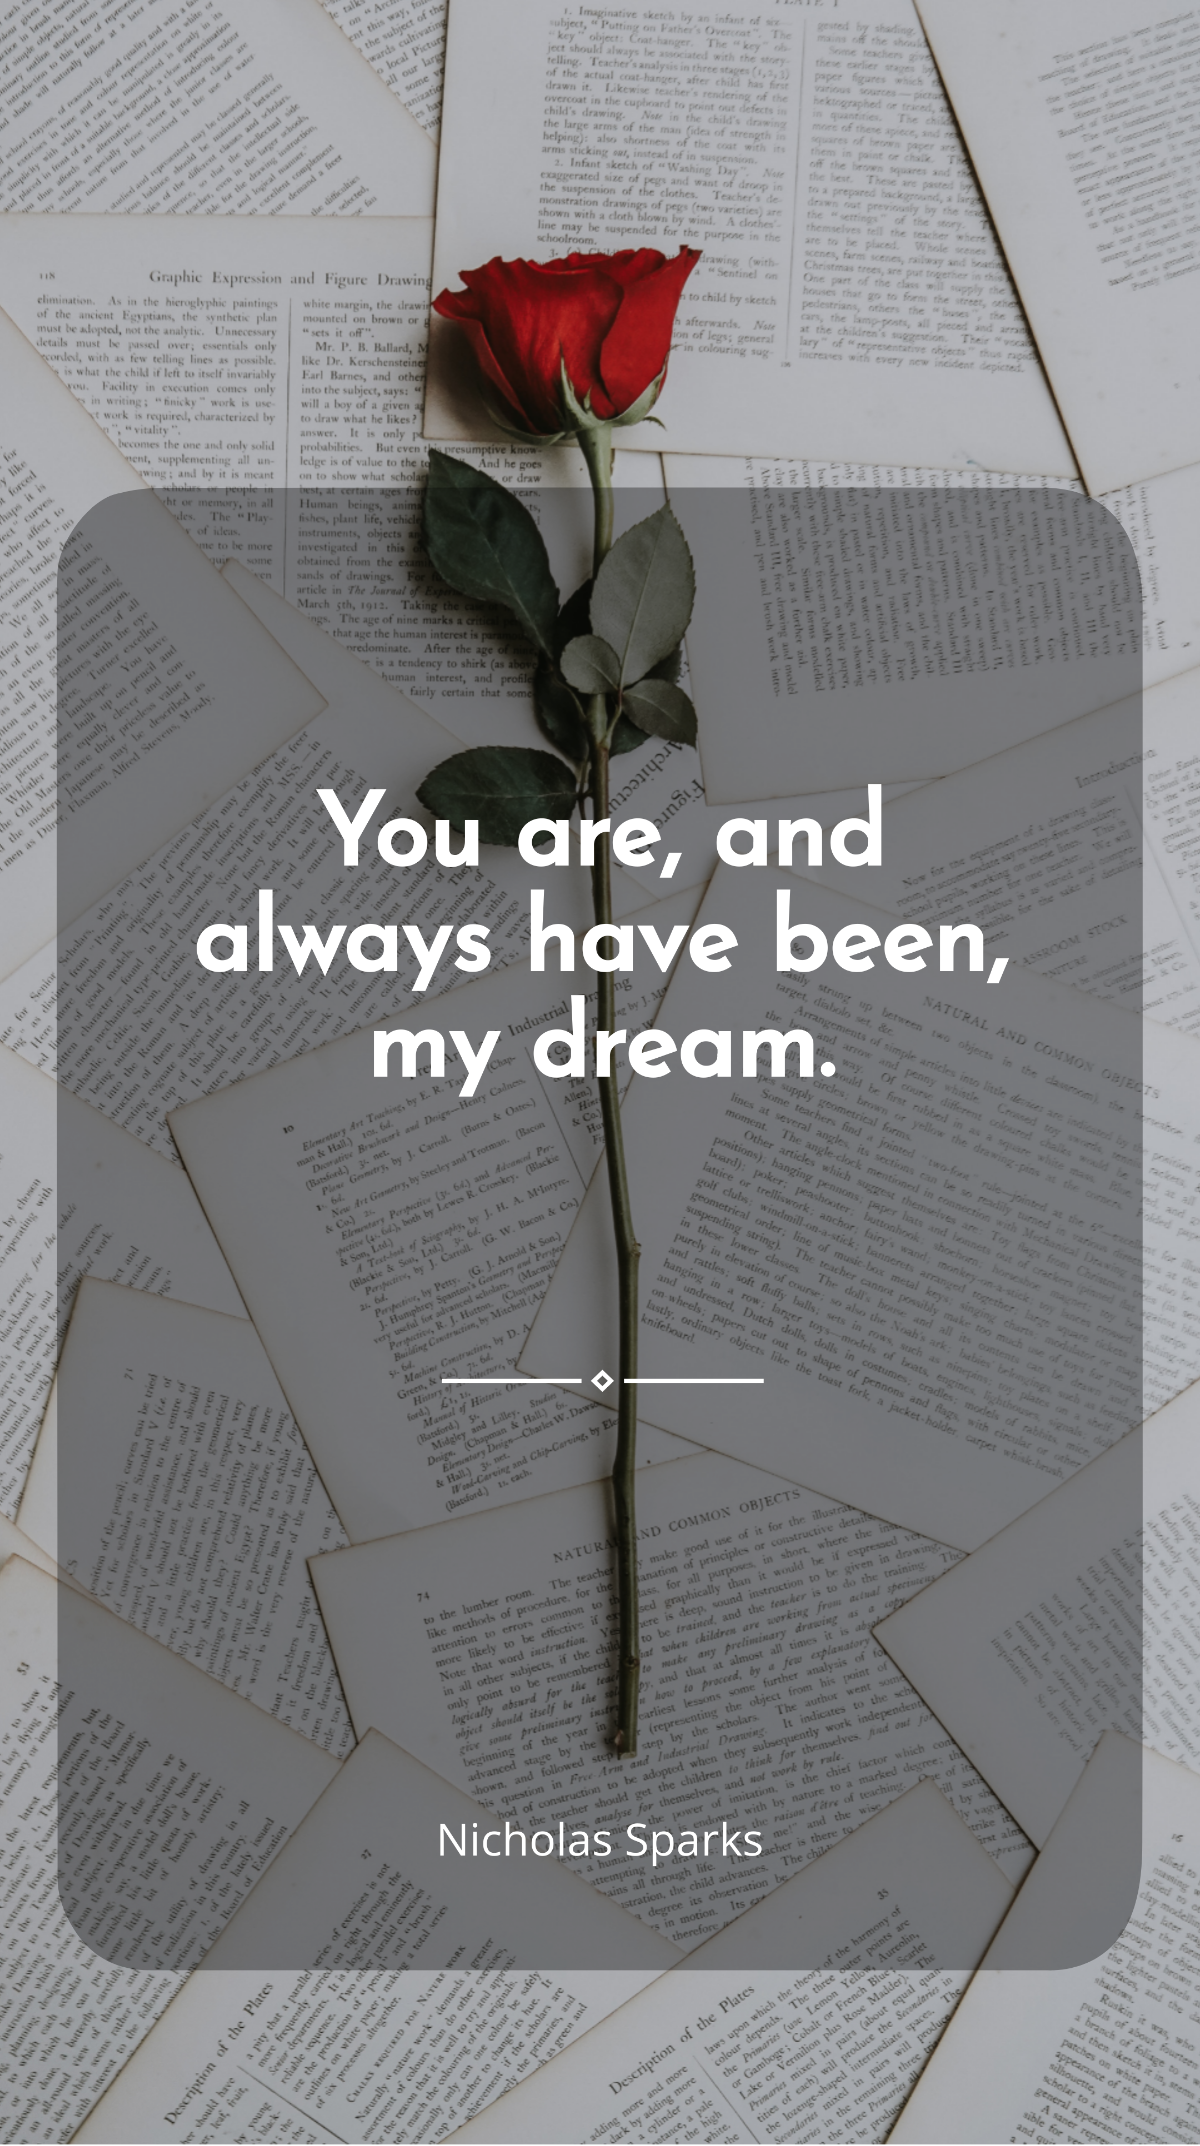 Nicholas Sparks - “You are, and always have been, my dream.” Template